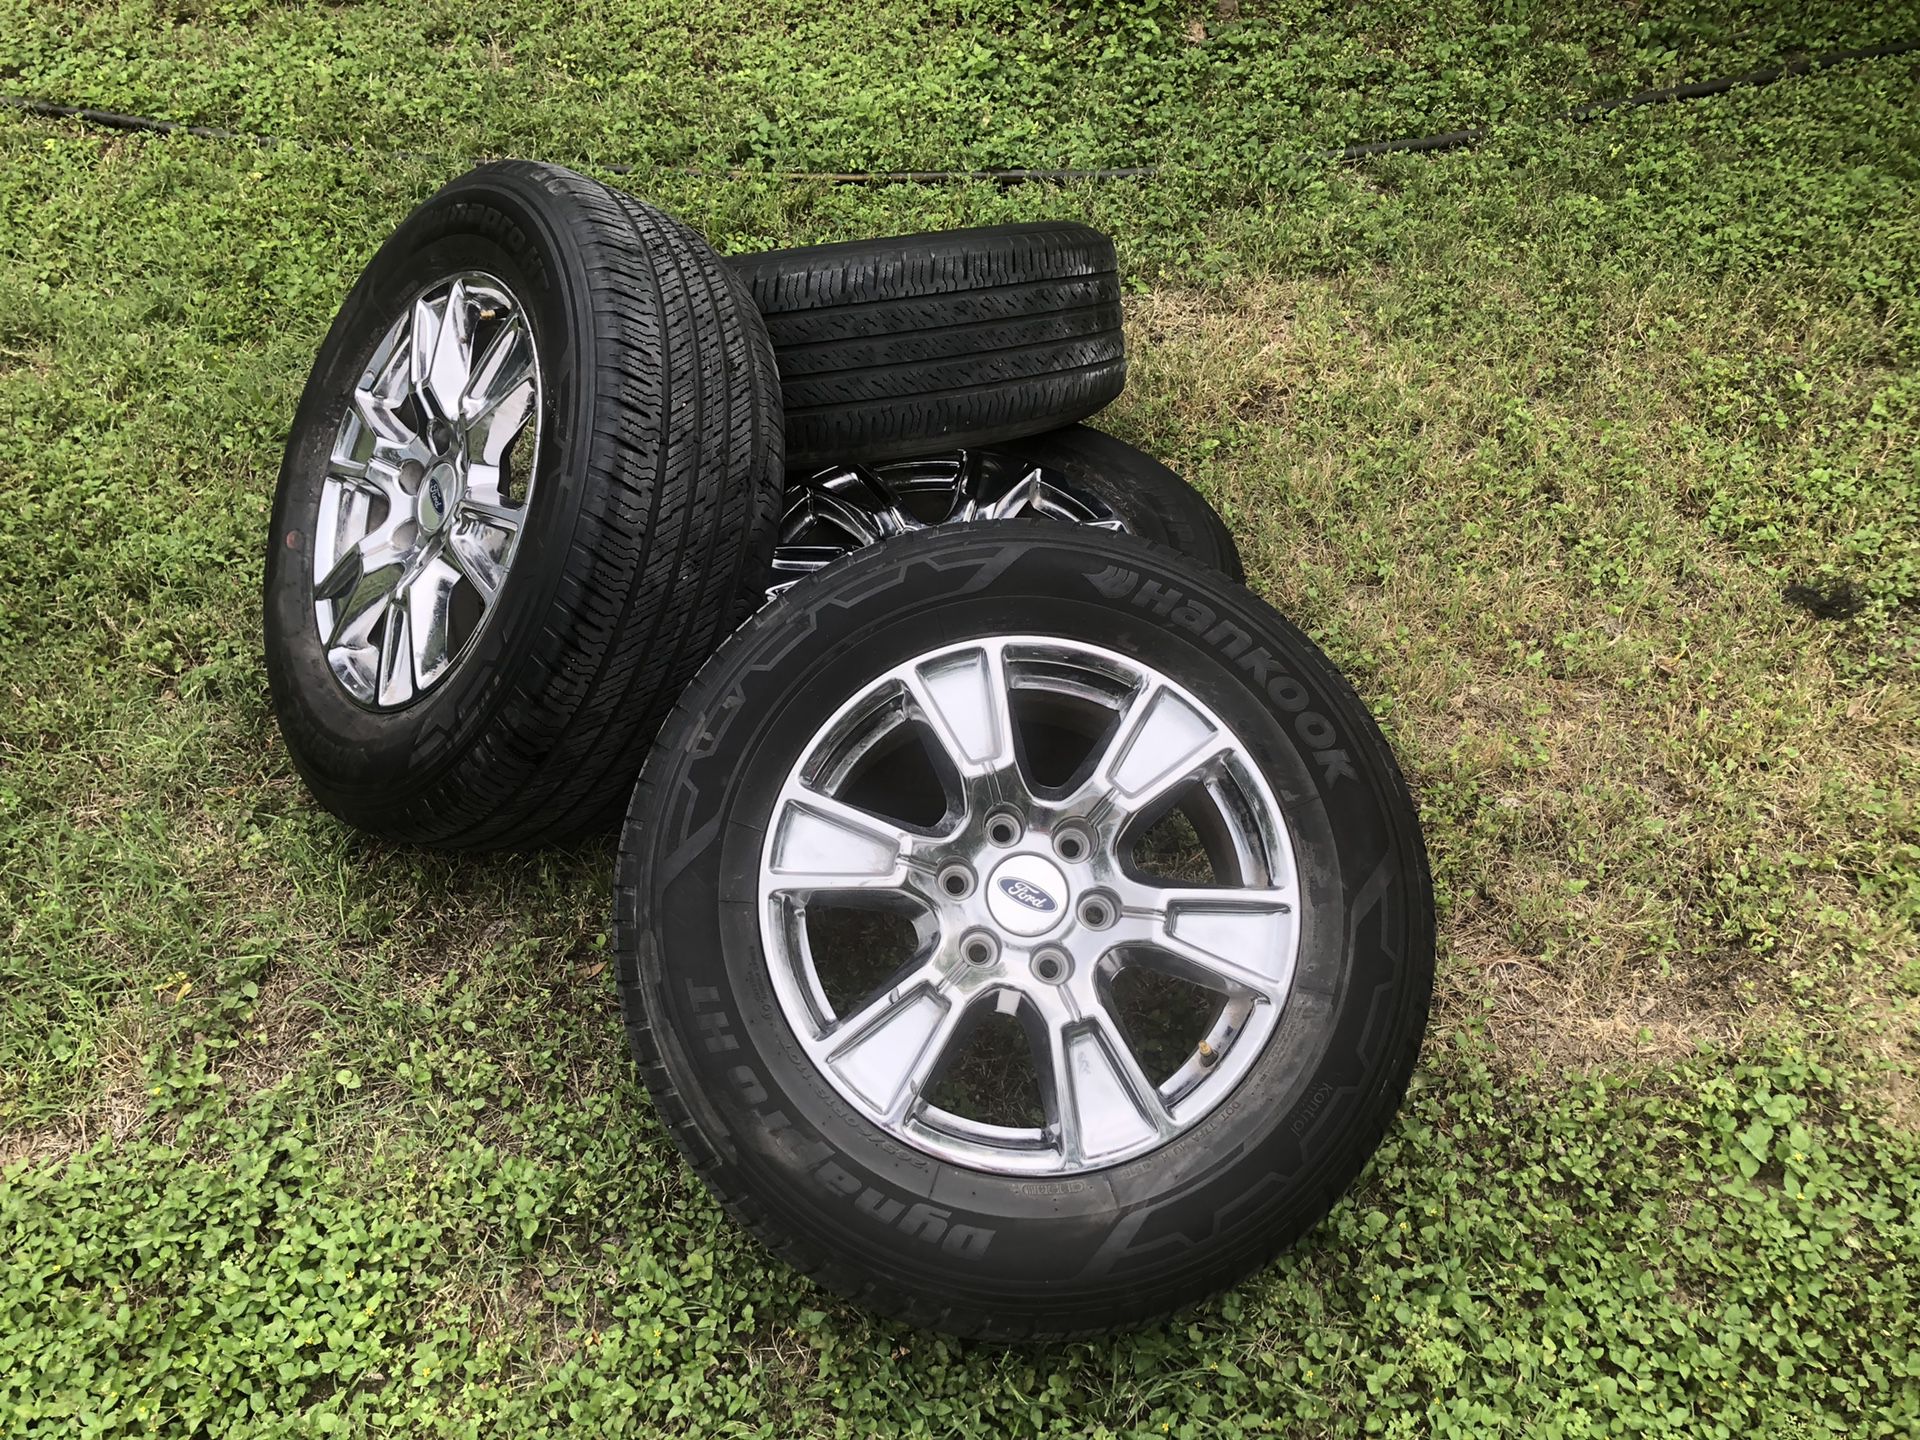 F150 2017 chrome rims and tires. Size 18